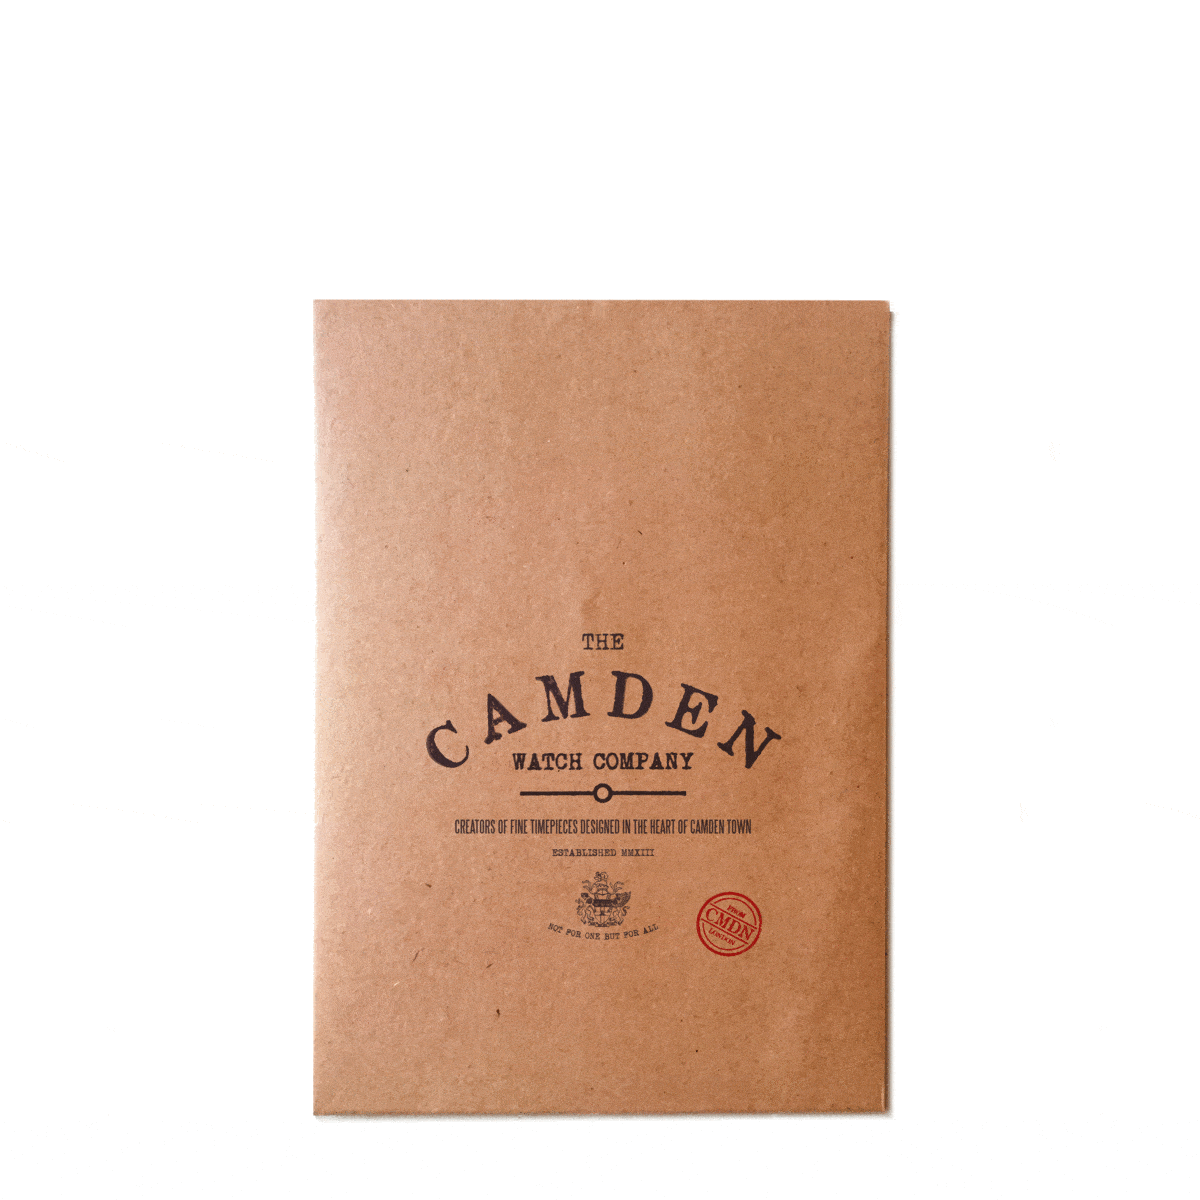 Gift Certificate - The Camden Watch Company